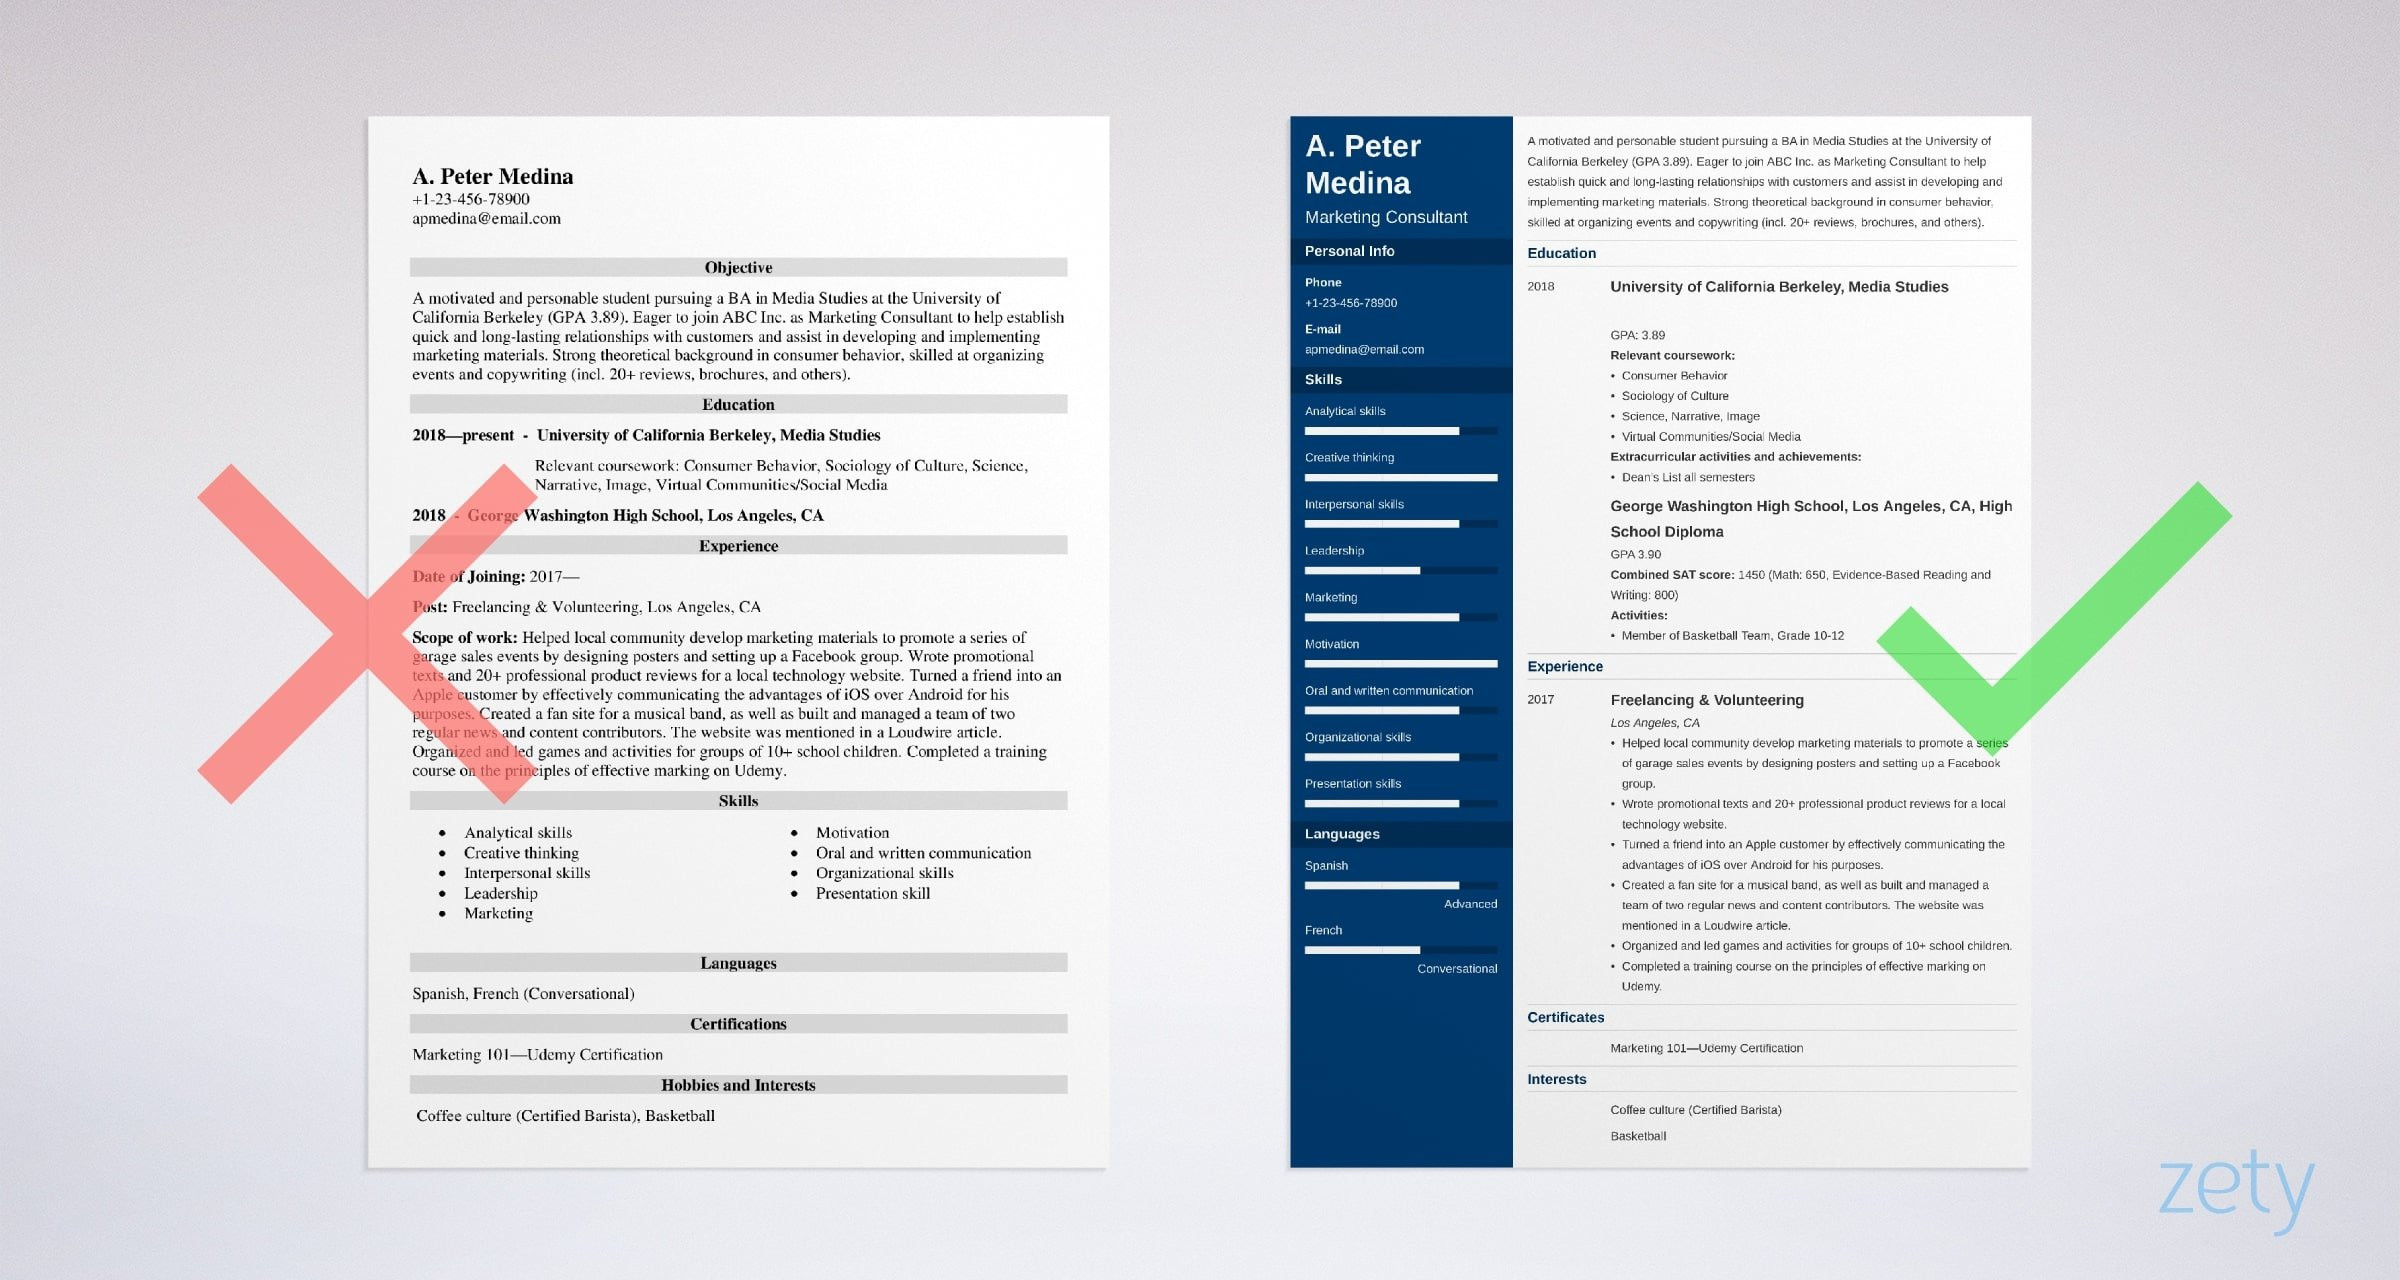 Resume Templates for Little Job Experience How to Write A Resume with No Experience & Get the First Job